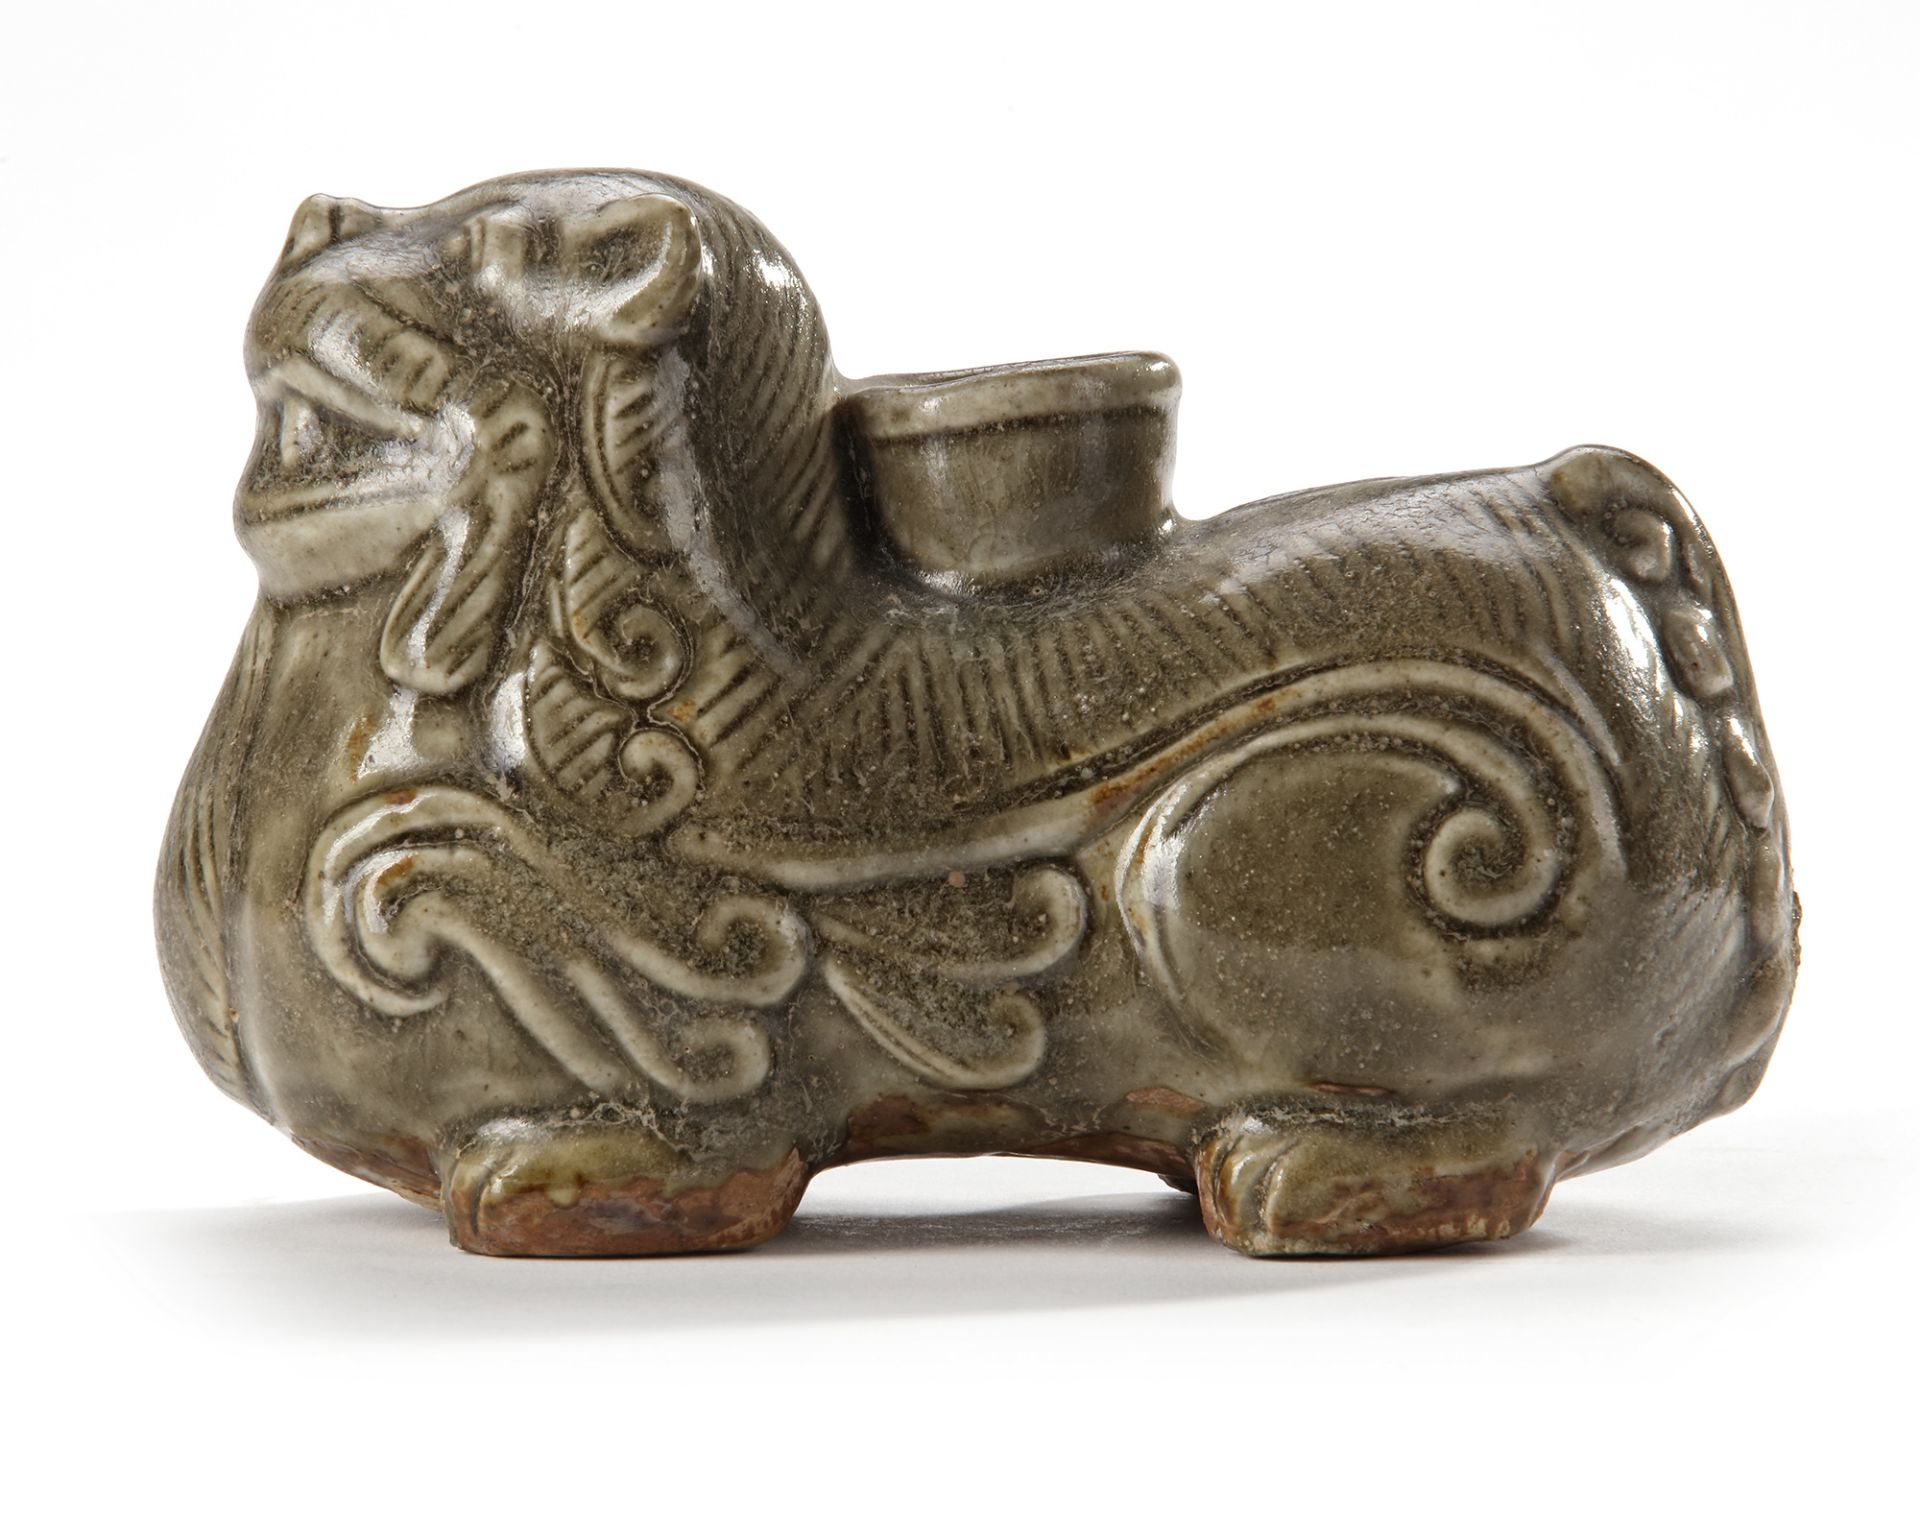 A CHINESE YUEYAO ZOOMORPHIC VESSEL, WESTERN JIN DYNASTY (265-317) - Image 2 of 6